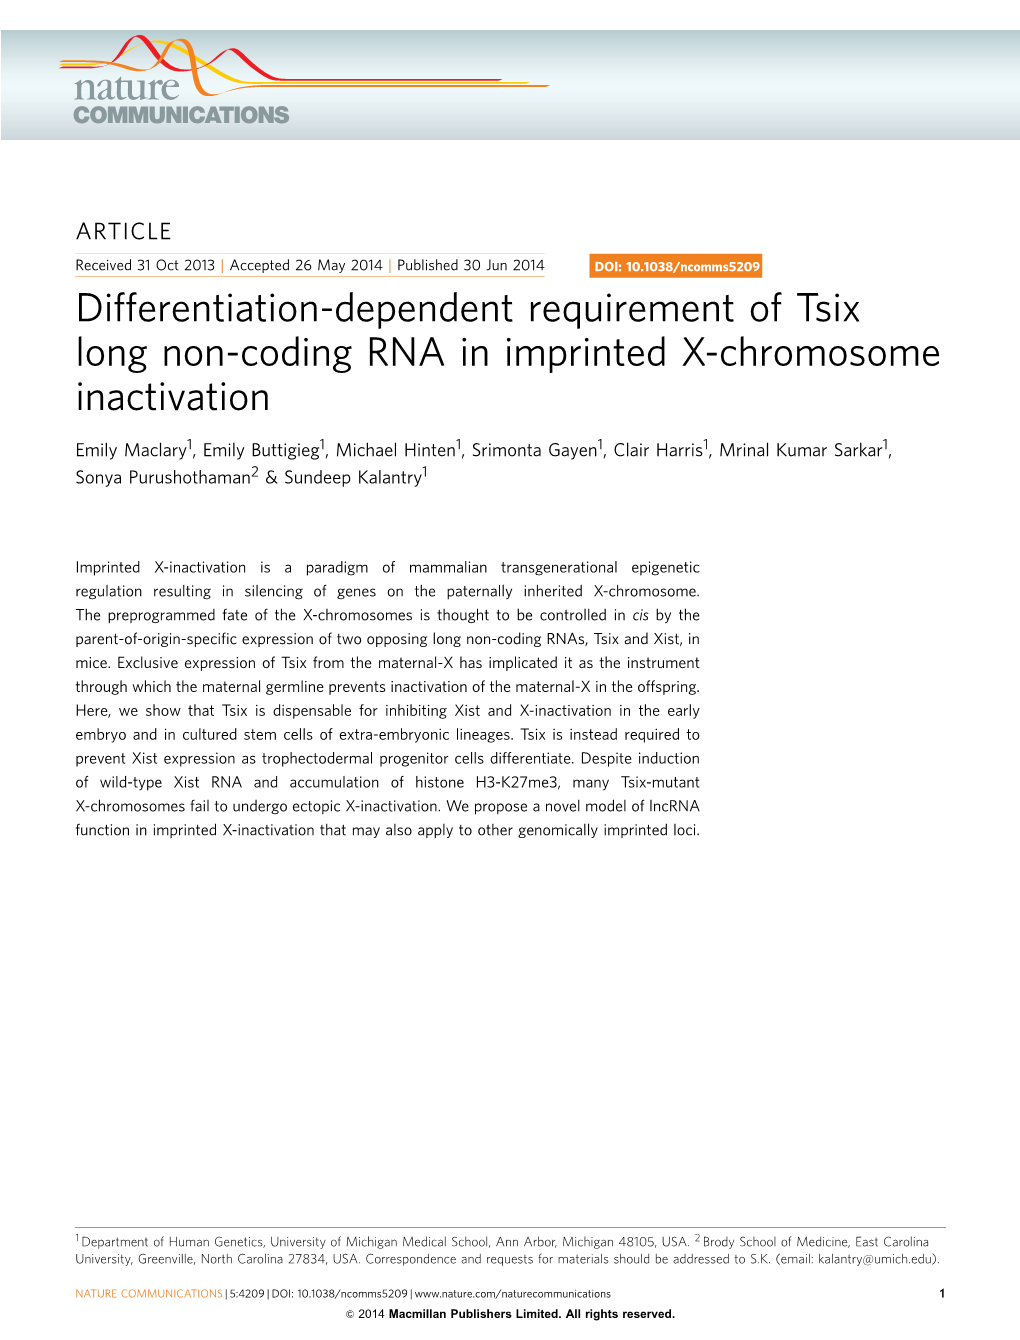 Differentiation-Dependent Requirement of Tsix Long Non-Coding RNA in Imprinted X-Chromosome Inactivation